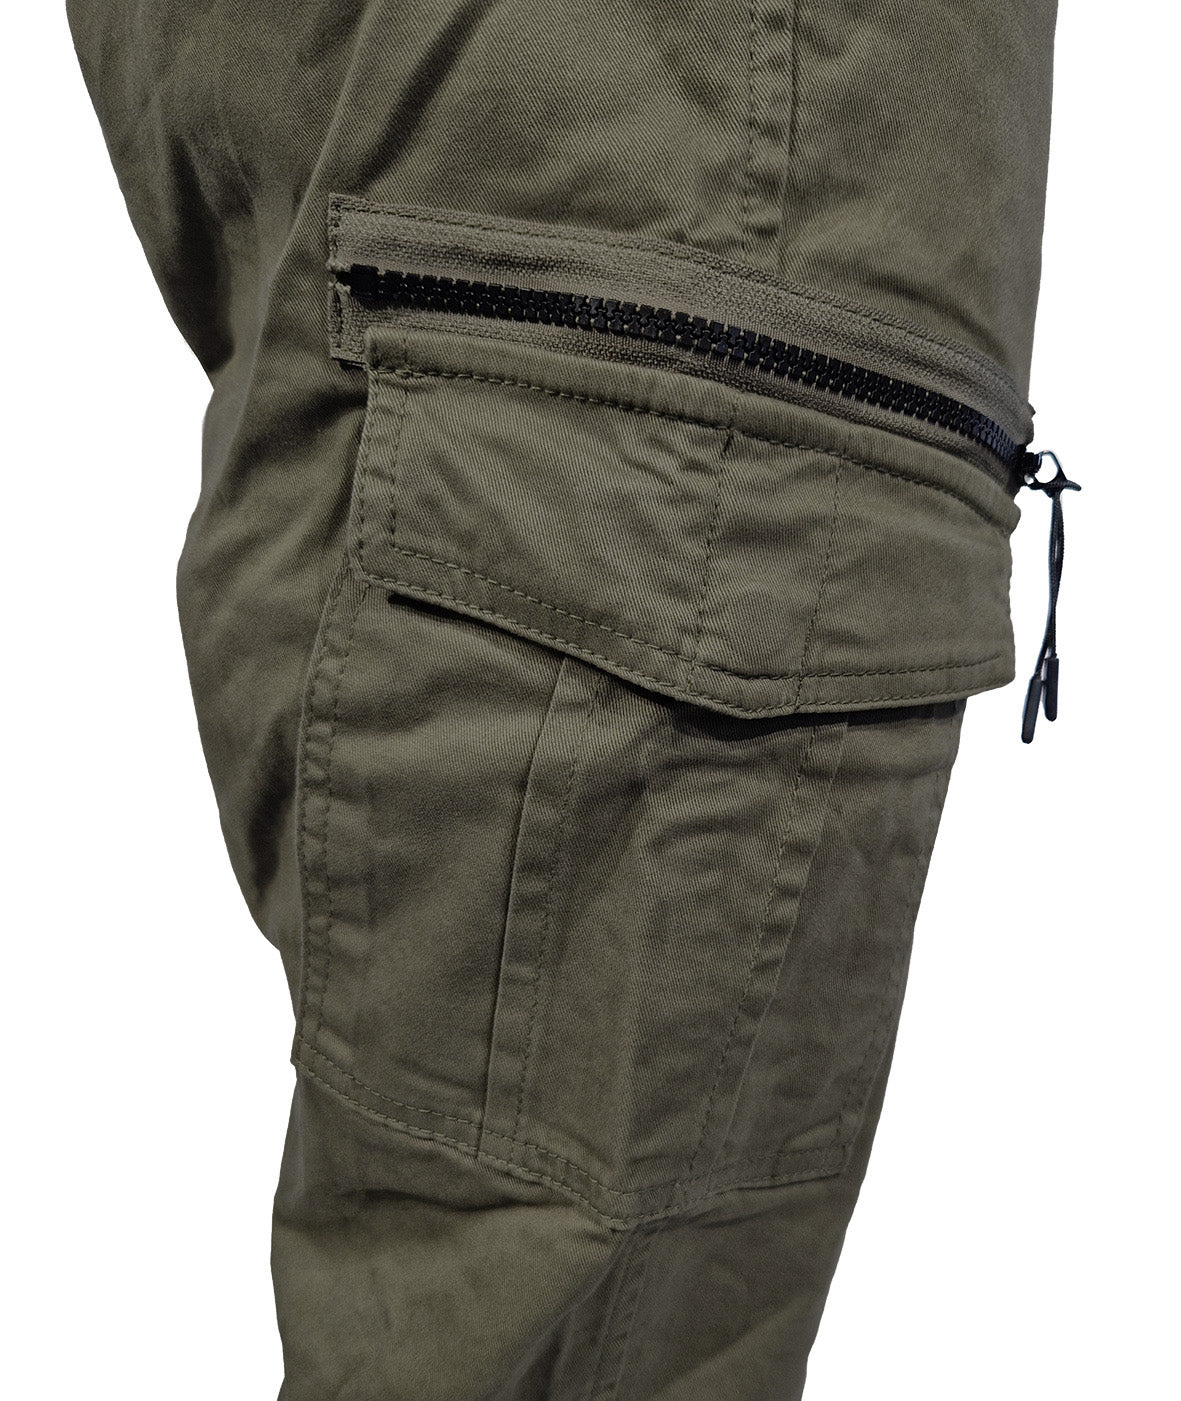 MAYFIELD Cargo pant in premium cotton twill - OLIVE